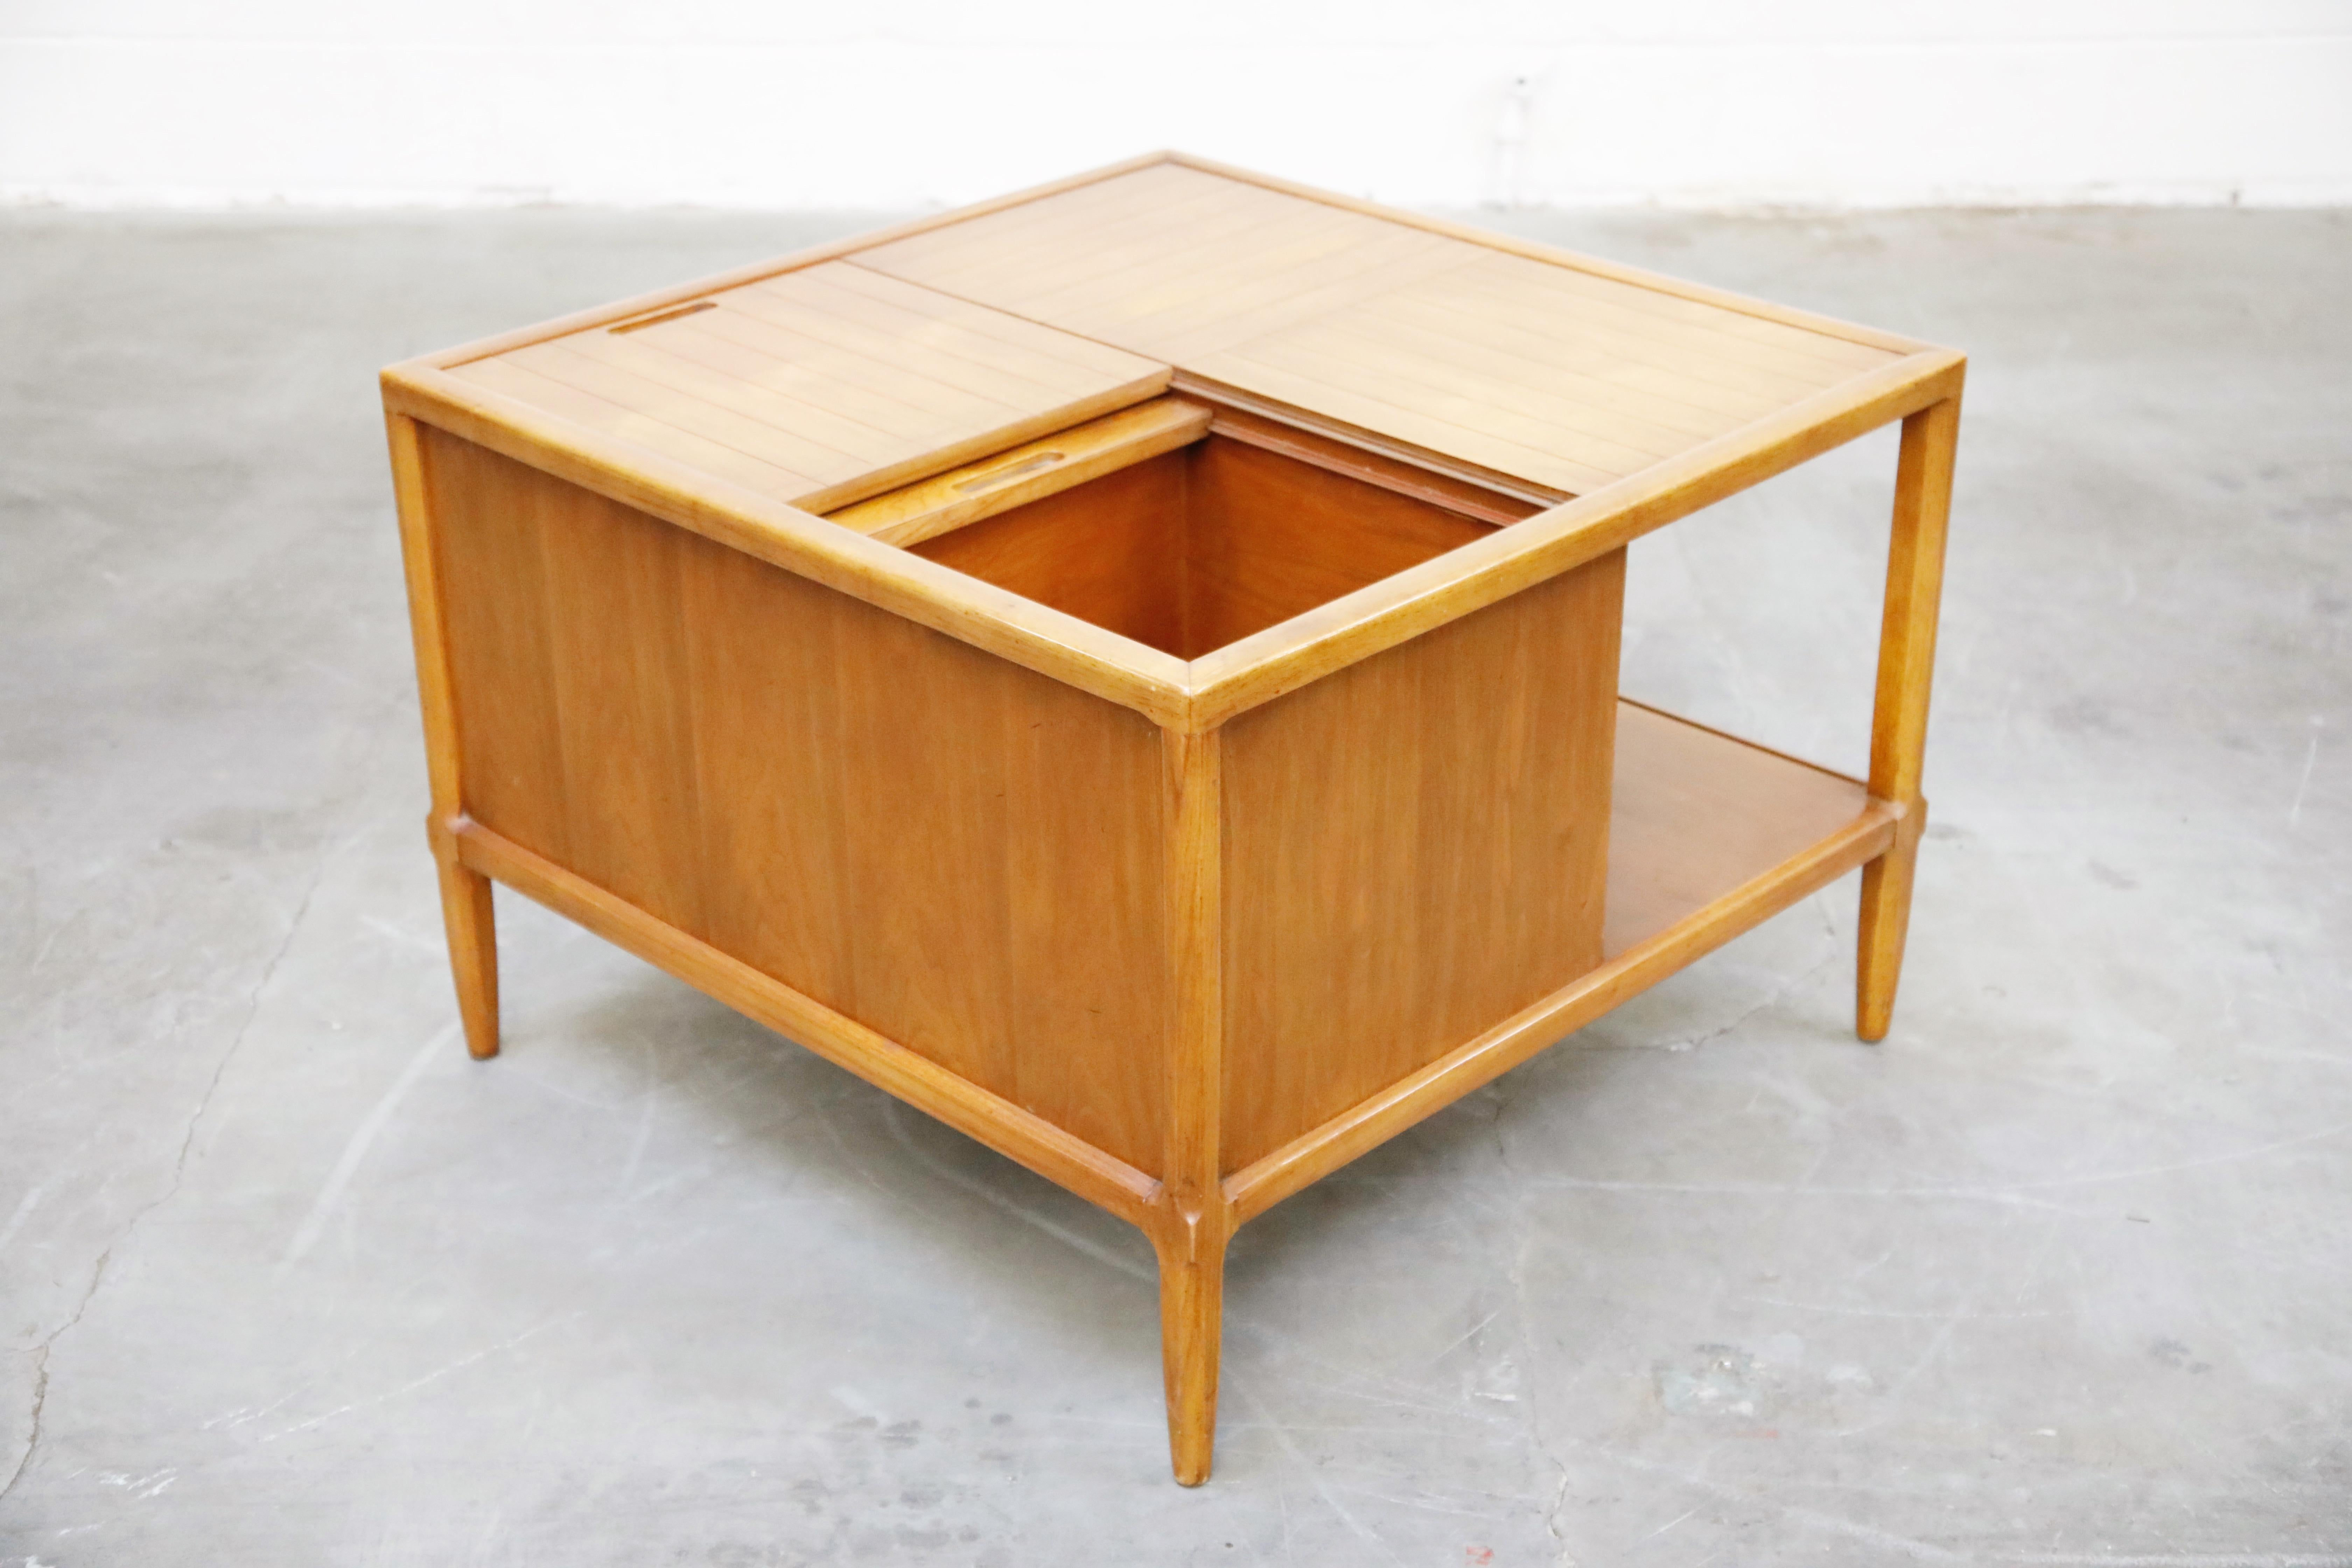 Tomlinson Sophisticate Cocktail Bar and Storage Coffee Table, 1950s, Signed 1